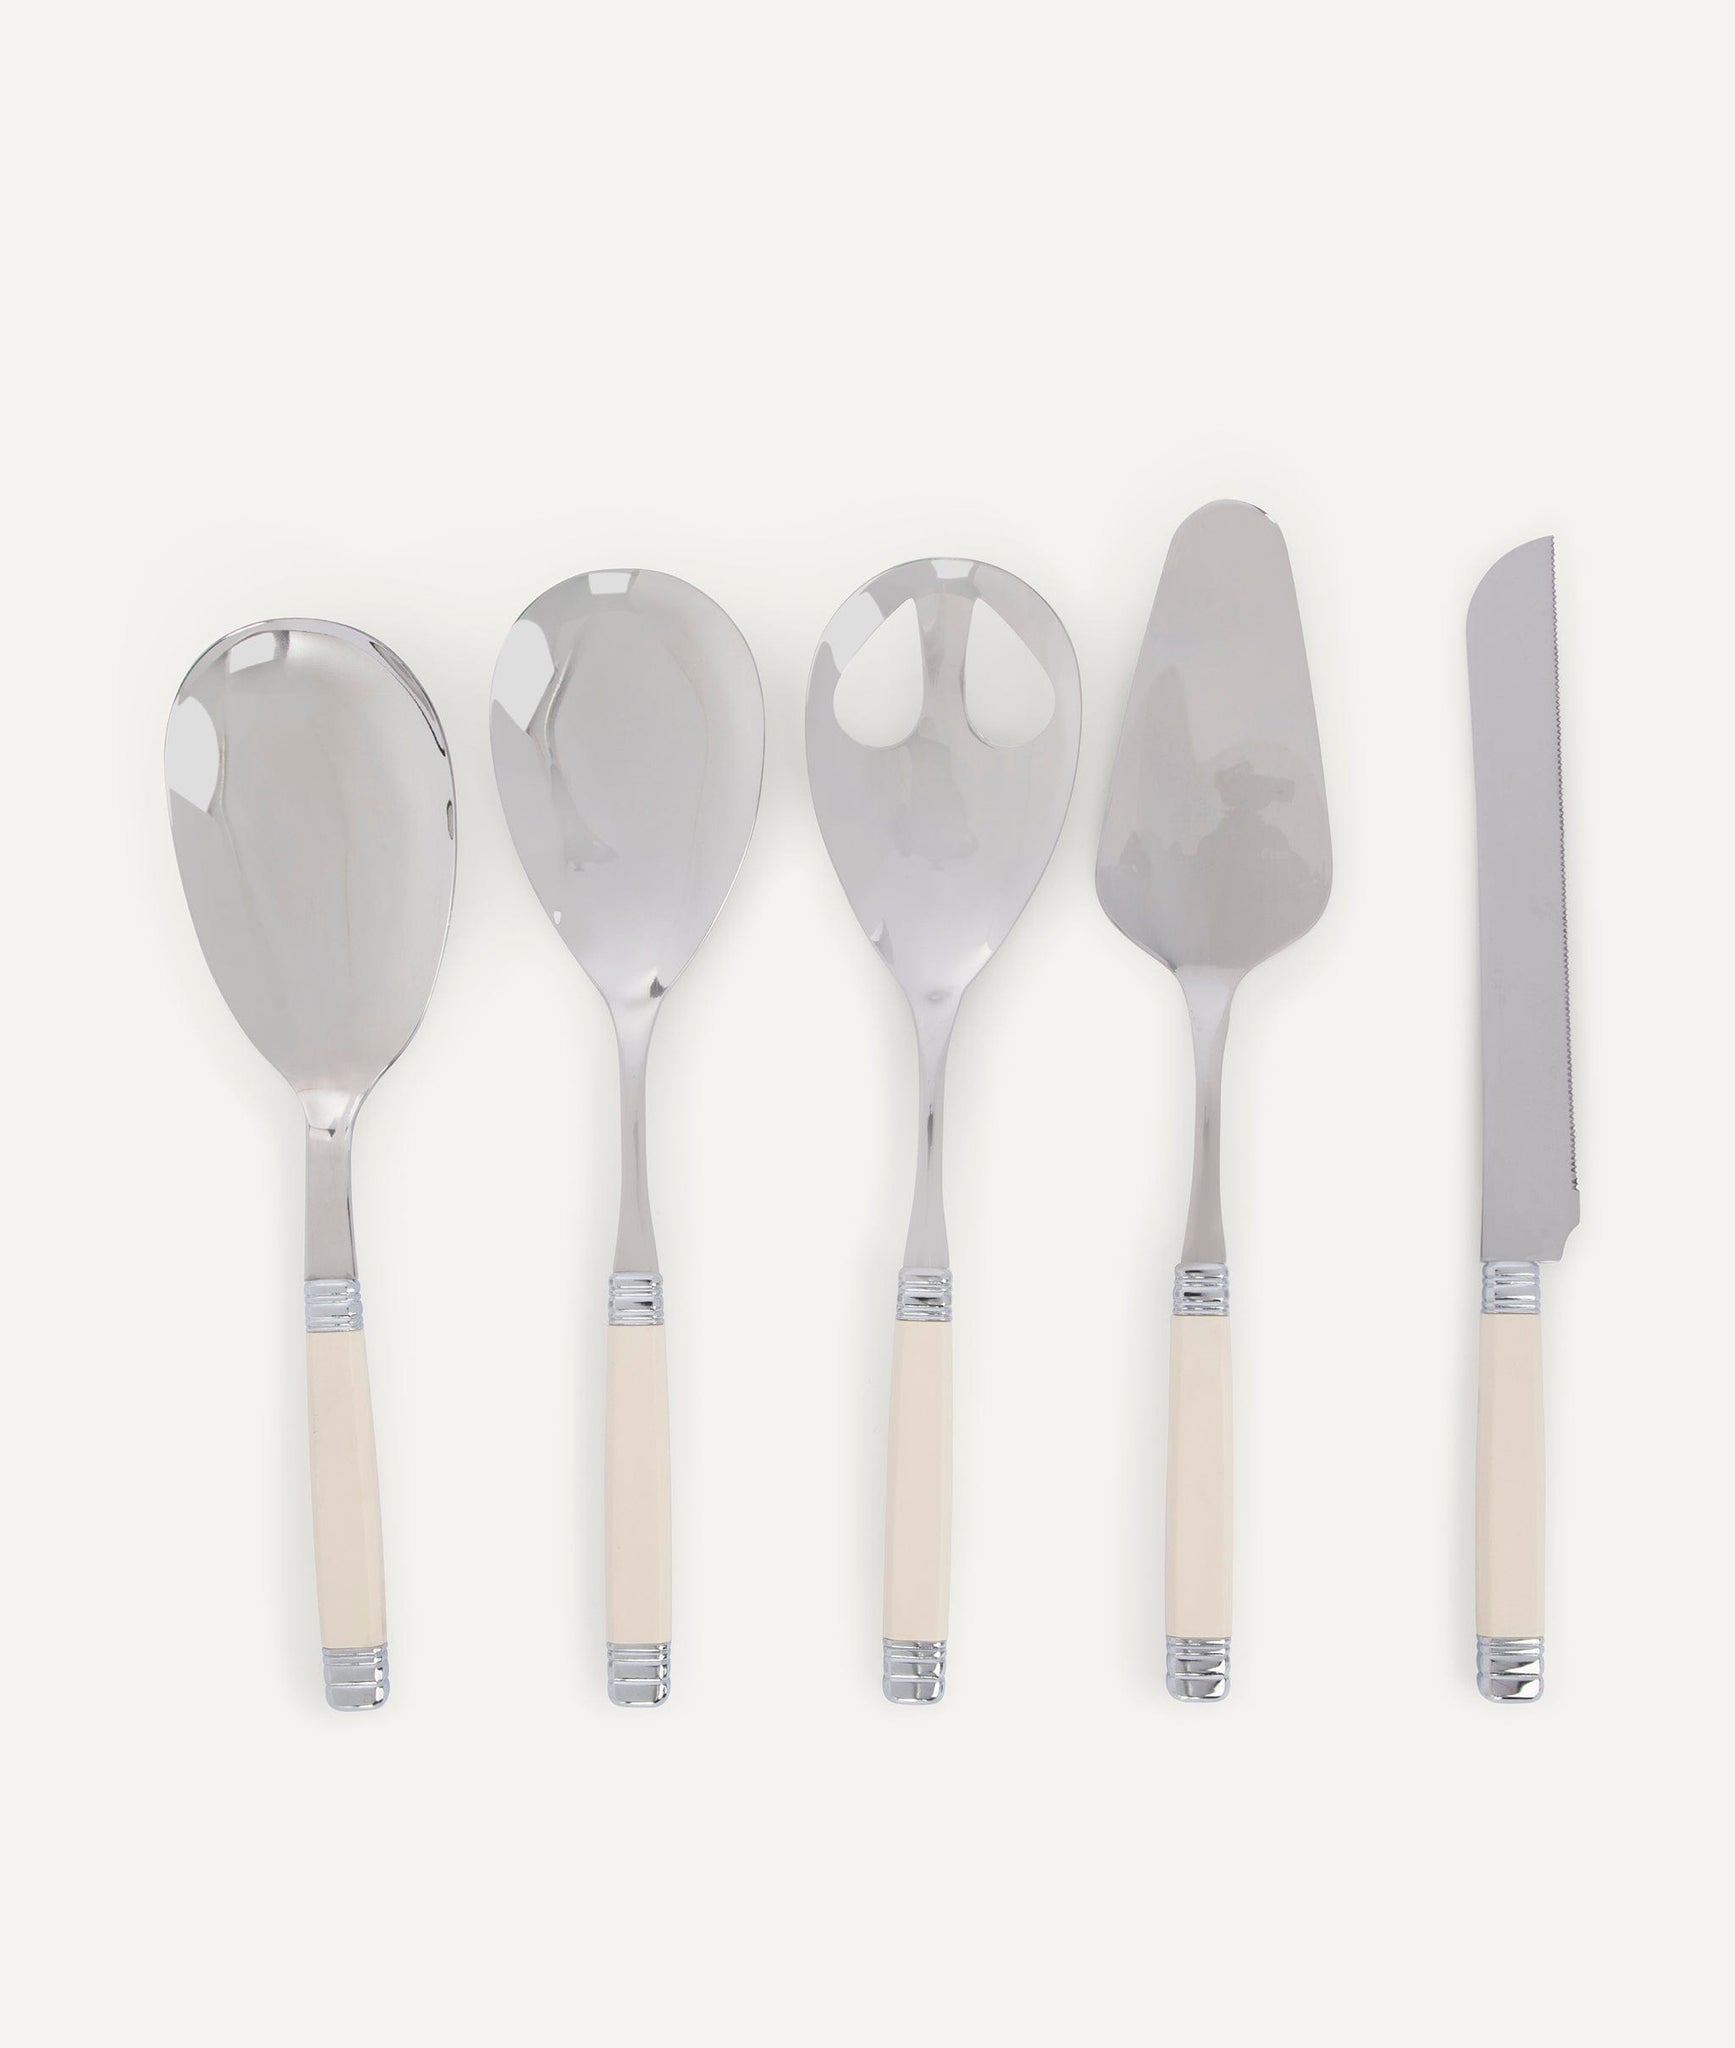 Dining Tools in Steel - 5 pieces